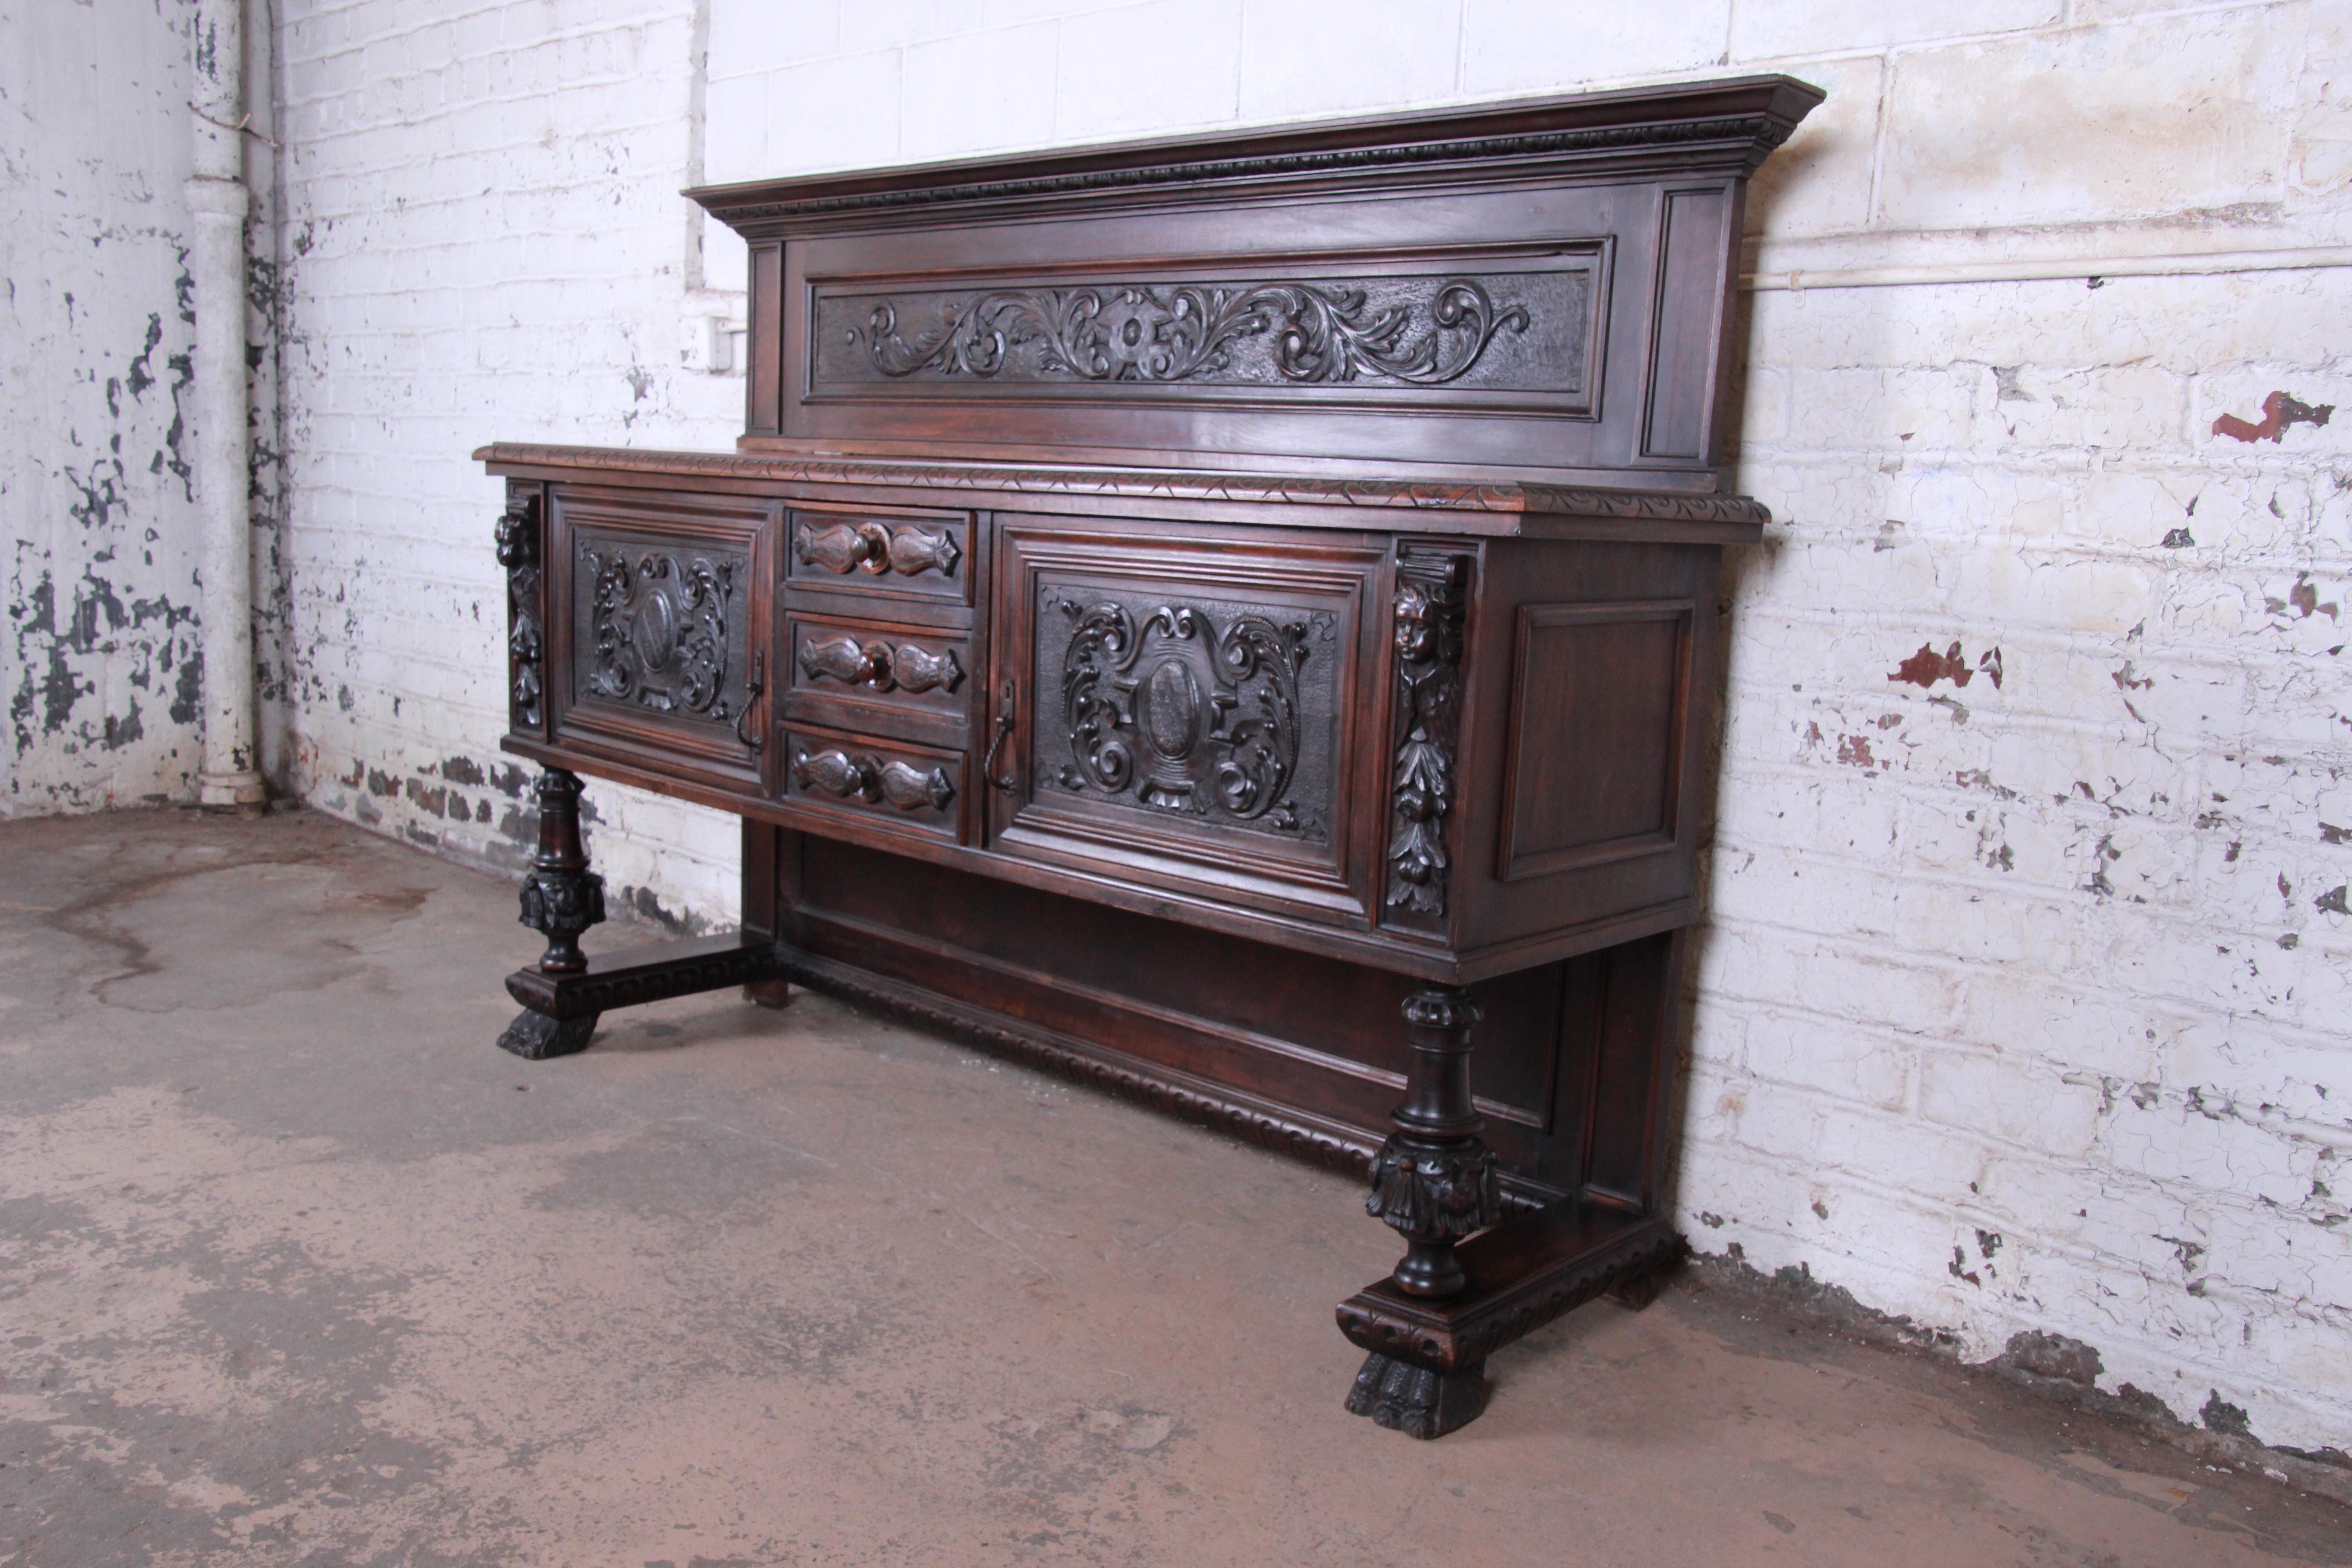 An outstanding 19th century French ornate carved walnut sideboard or bar cabinet. This outstanding cabinet features solid dark walnut construction with incredible carved wood details, including carved faces and paw feet. It offers ample storage,